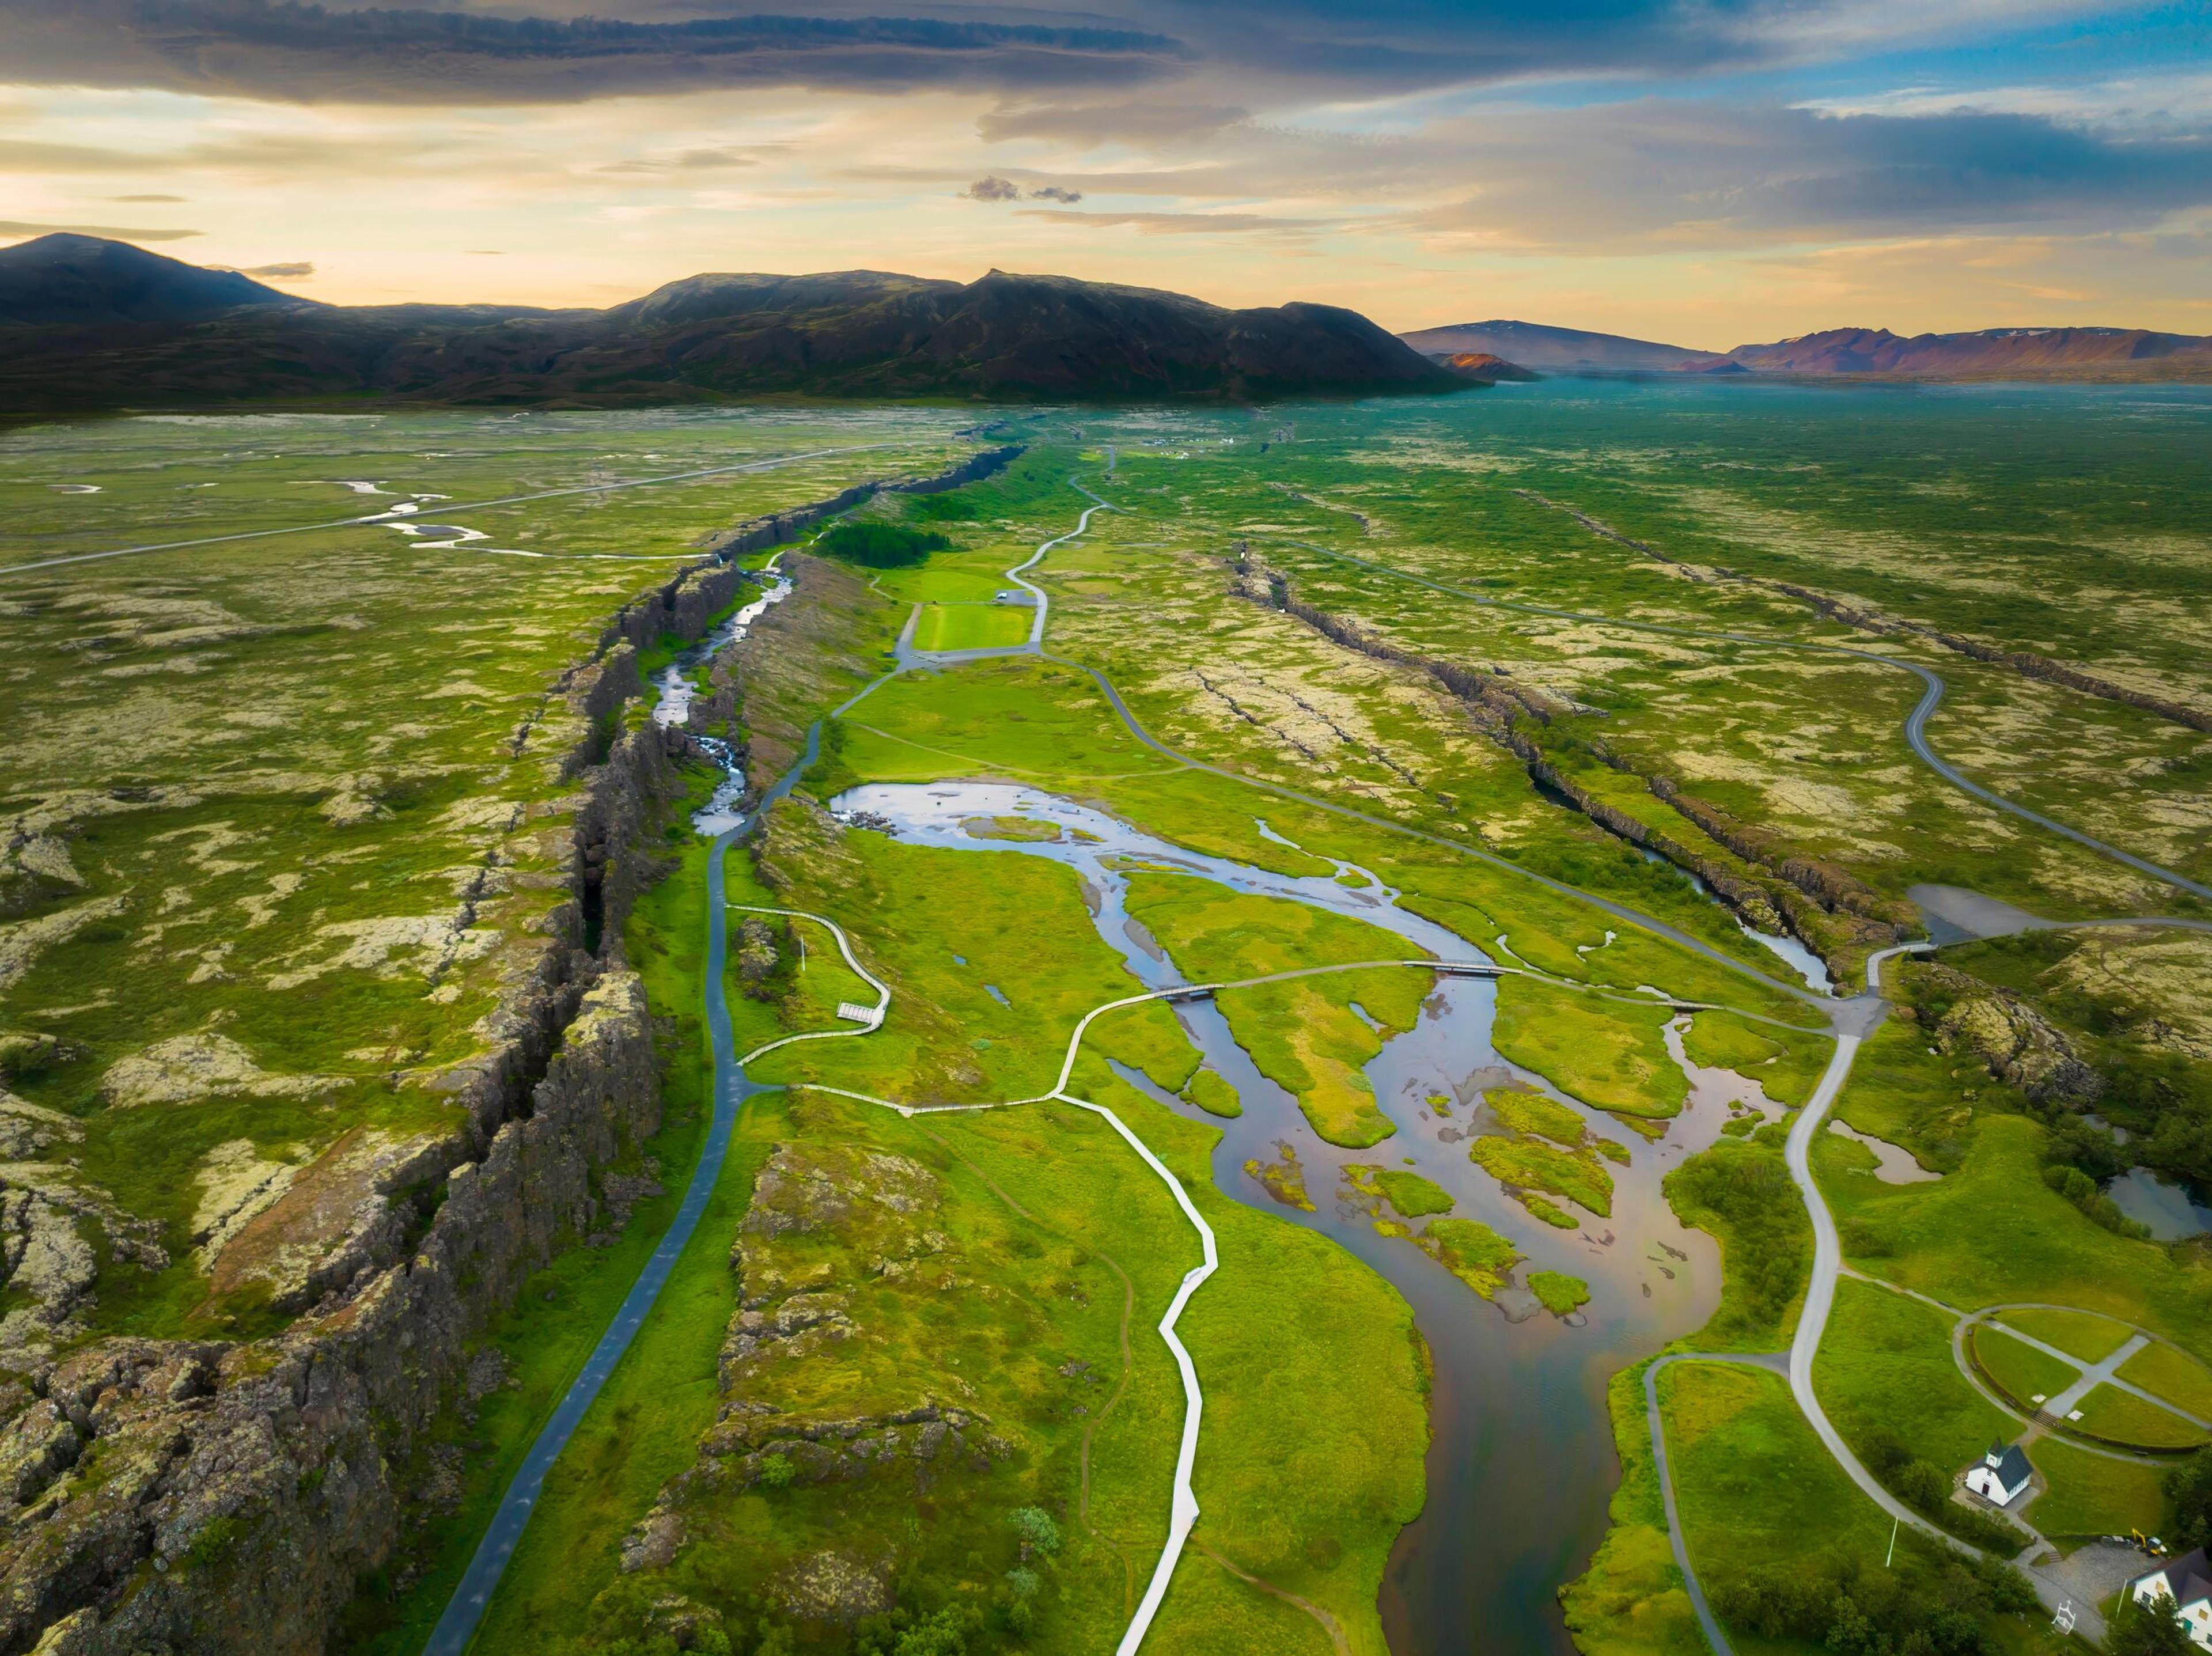 Thingvellir National Park in Iceland seen from above.